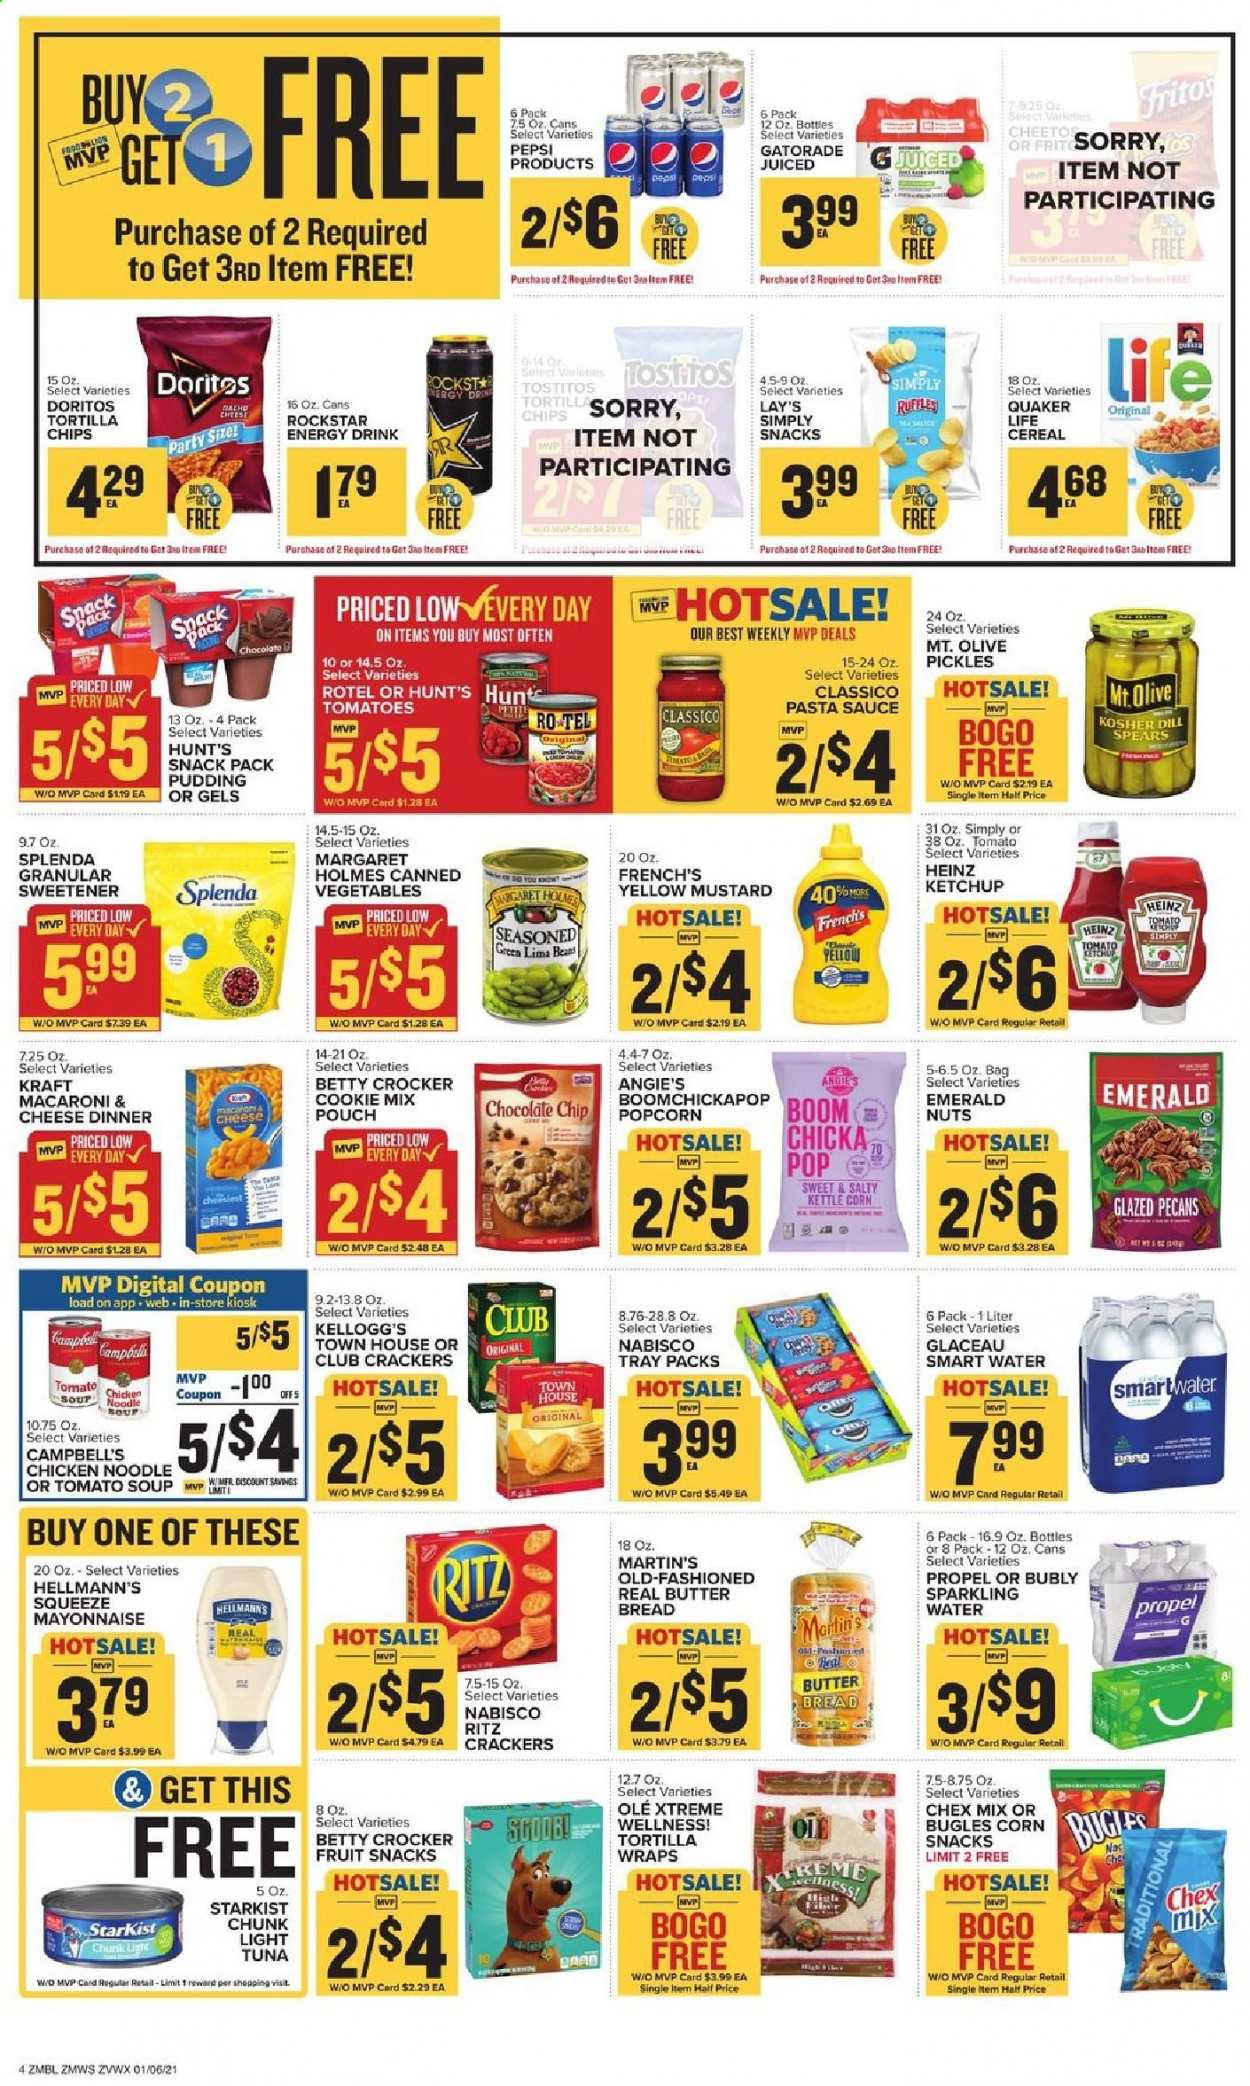 thumbnail - Food Lion Flyer - 01/06/2021 - 01/12/2021 - Sales products - pickles, bread, tuna, StarKist, Campbell's, macaroni & cheese, tomato soup, chicken soup, soup, sauce, Quaker, Kraft®, pudding, mayonnaise, Hellmann’s, beans, cookies, crackers, Kellogg's, fruit snack, RITZ, Doritos, tortilla chips, kettle corn, Cheetos, chips, Lay’s, popcorn, Tostitos, Chex Mix, Heinz, canned vegetables, light tuna, cereals, Fritos, lima beans, noodles, dill, mustard, ketchup, pasta sauce, pecans, Pepsi, energy drink, Rockstar, Gatorade, sparkling water, Voom, tray. Page 5.